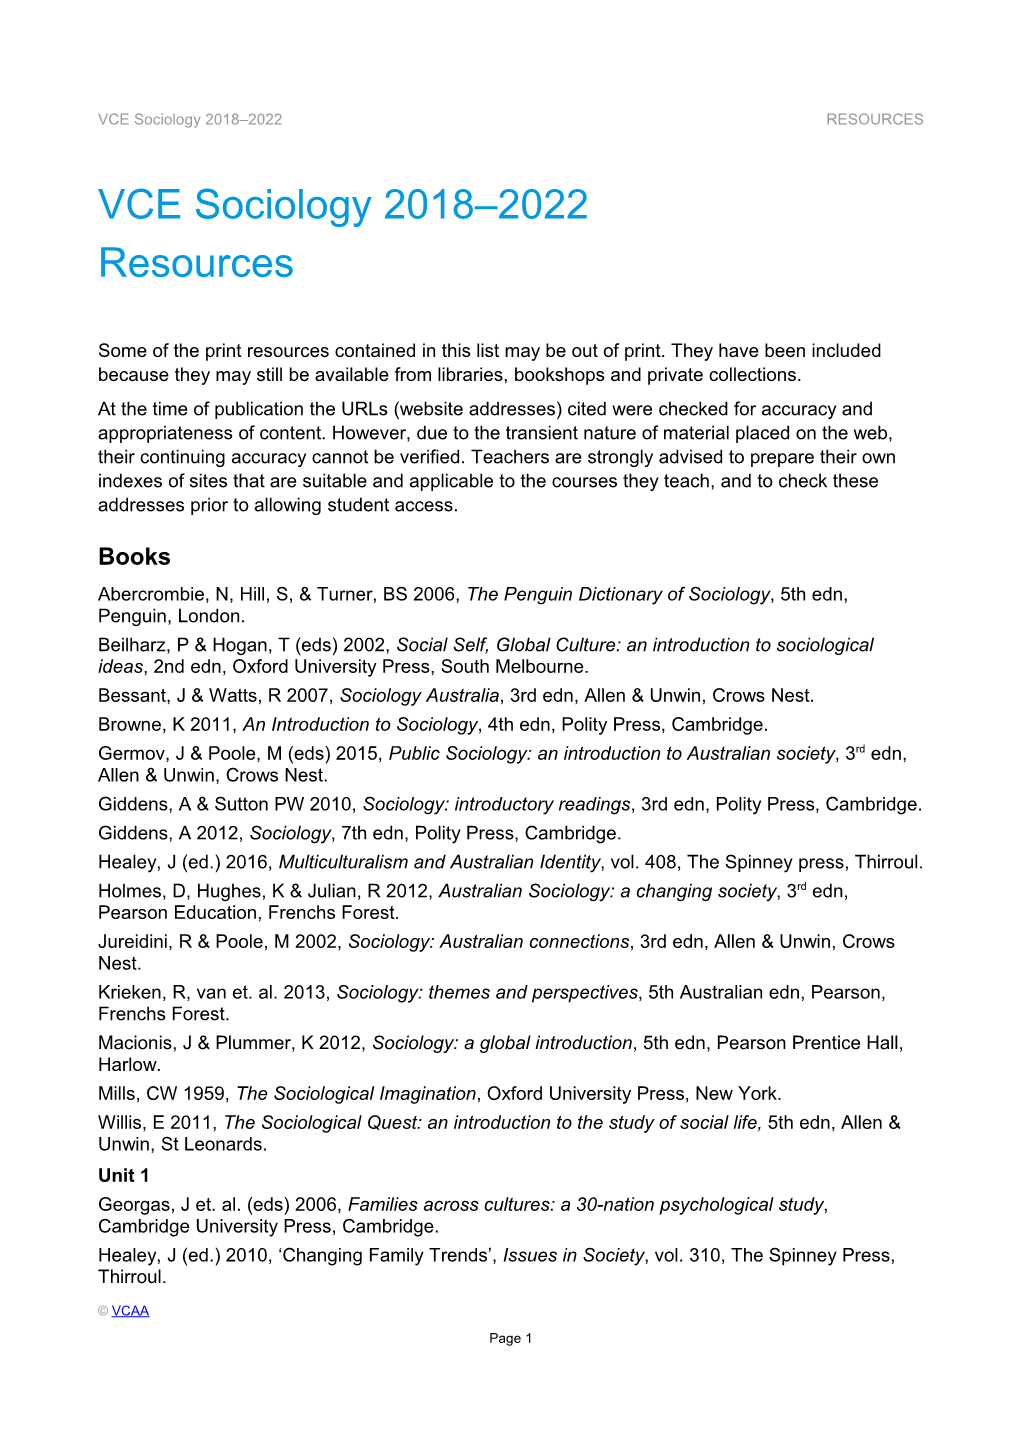 VCE Sociology 2018 2022 Resources